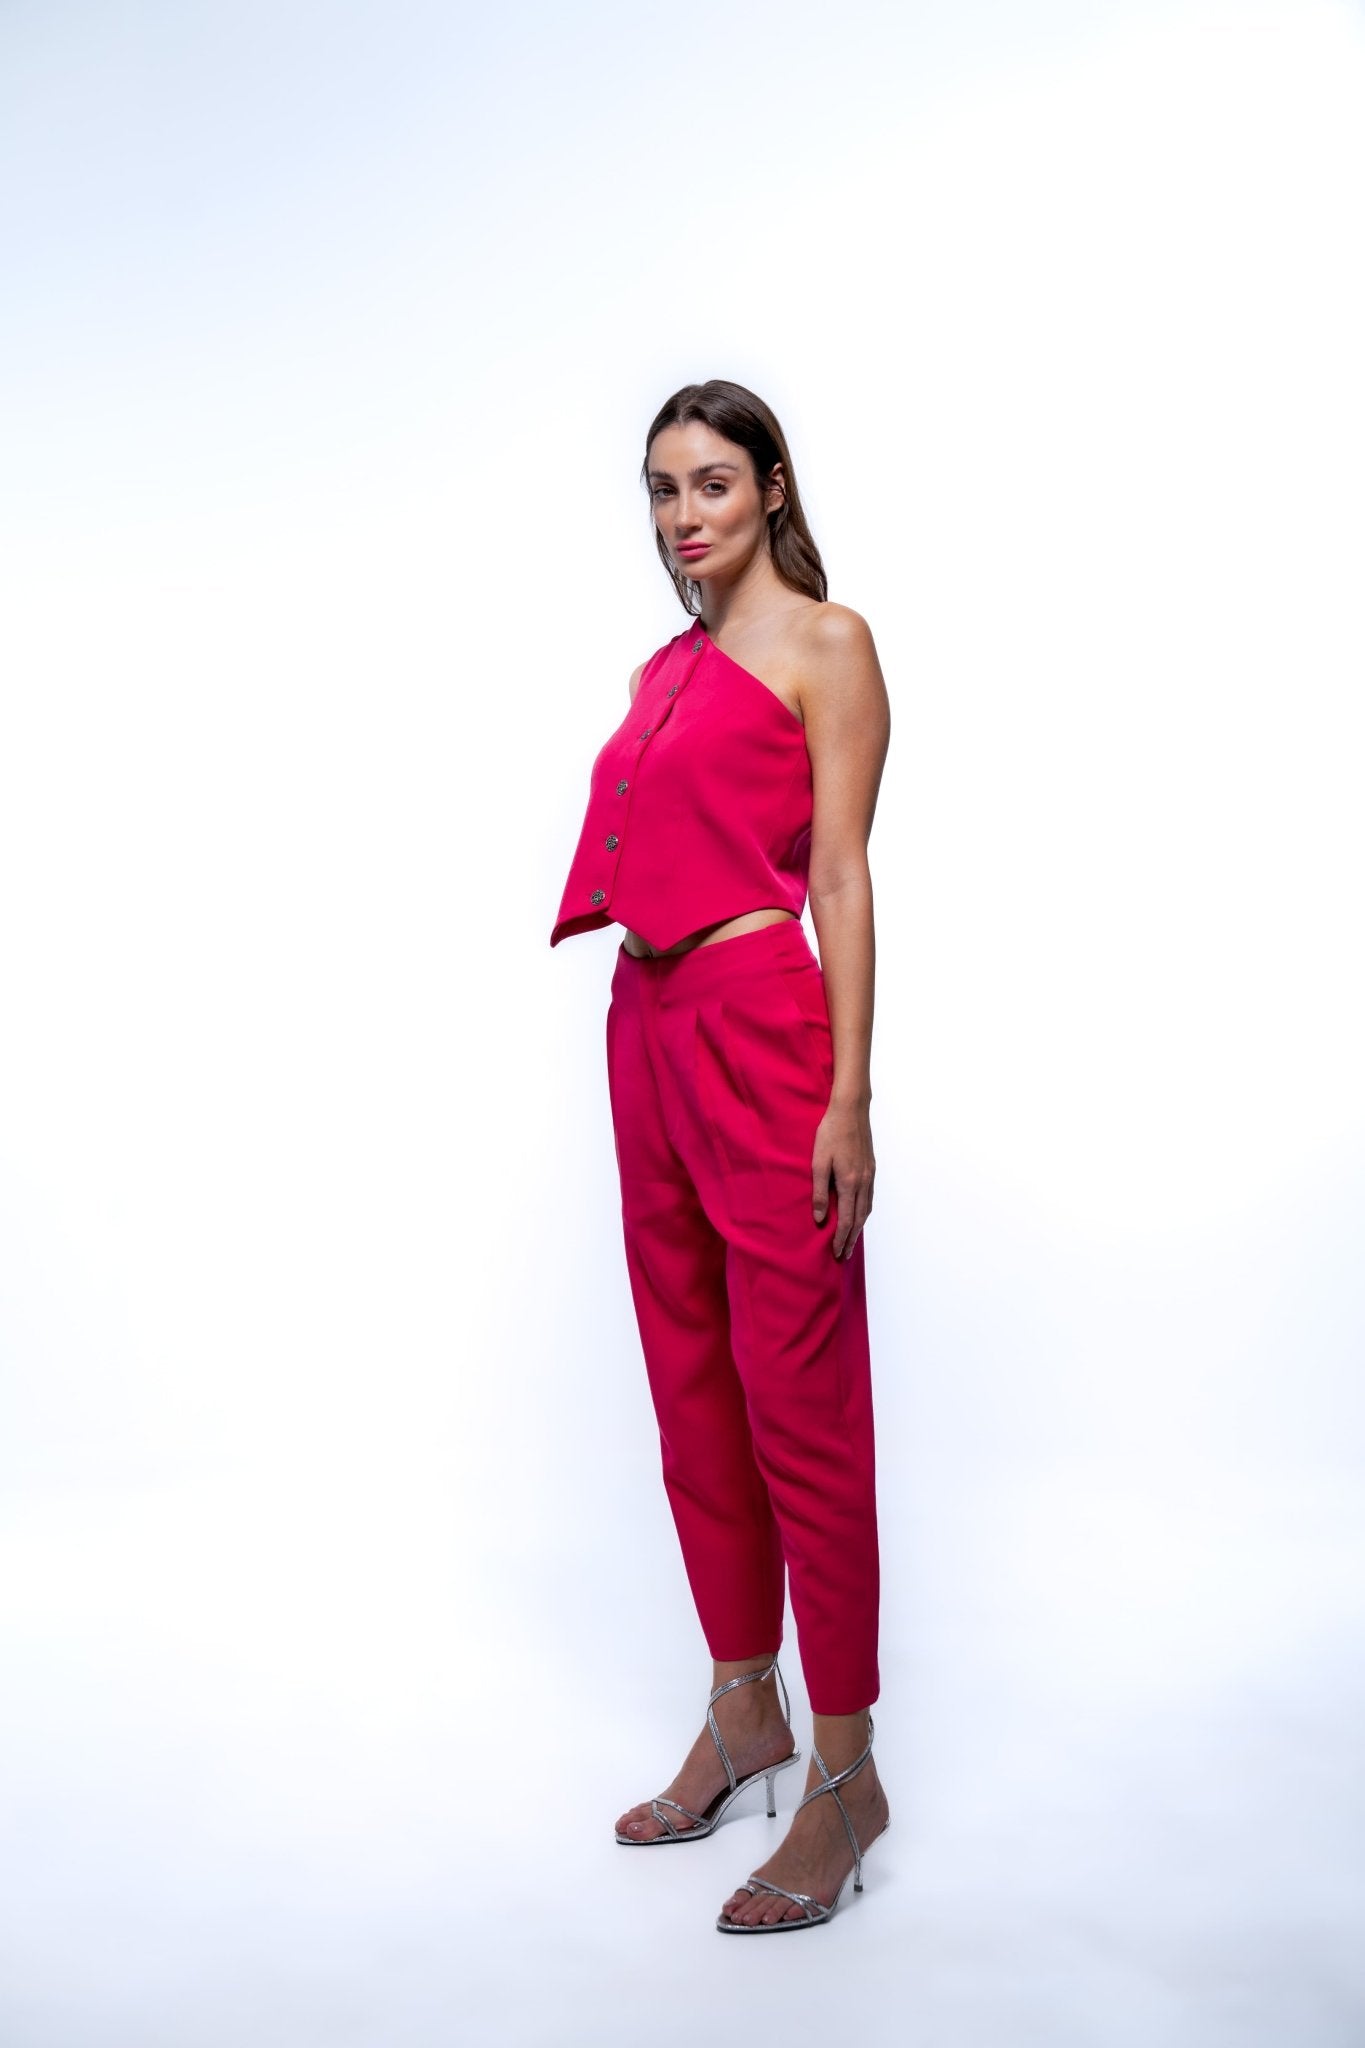 ASYMETRICAL ONE SHOULDER TOP AND PANT FUCHIA PINK CO - ORD SET - Sotbella